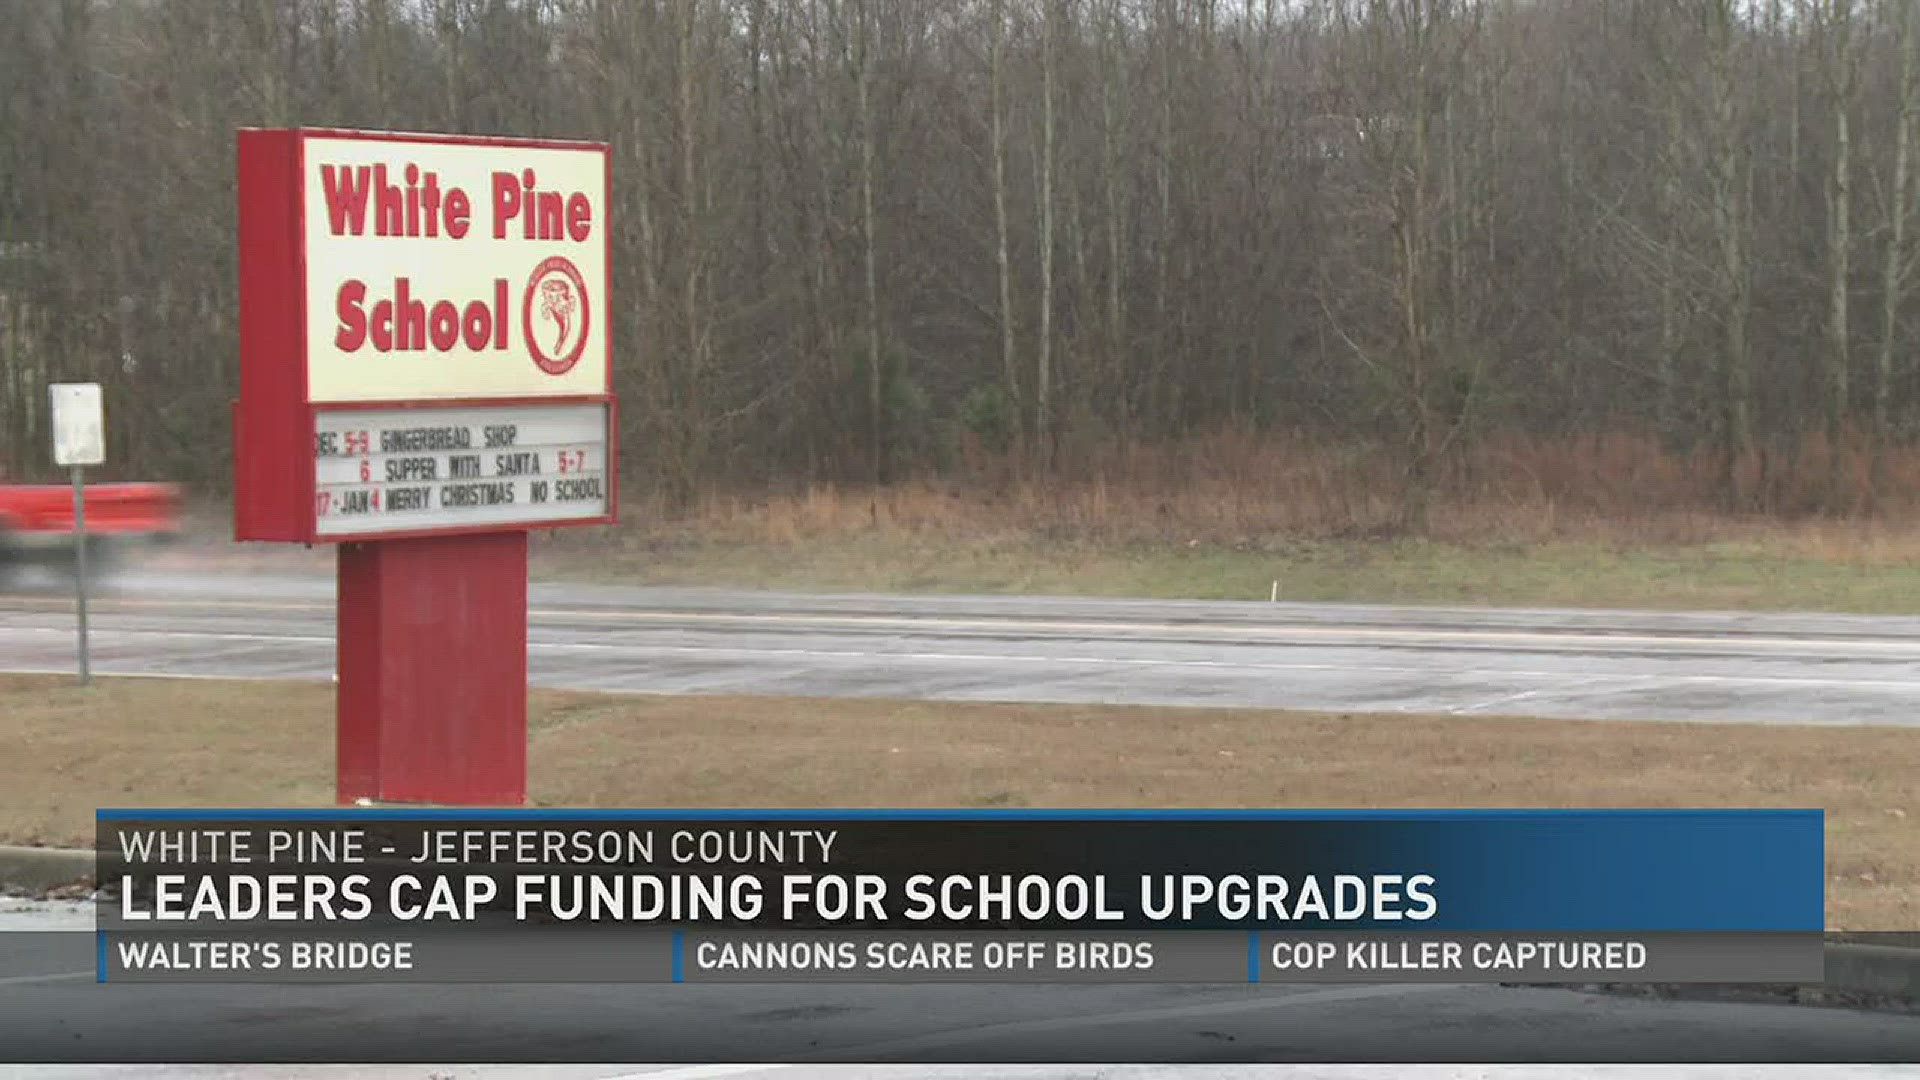 Jan. 17, 2017: Jefferson County leaders voted not to give more funds to White Pine Elementary School for school renovations.